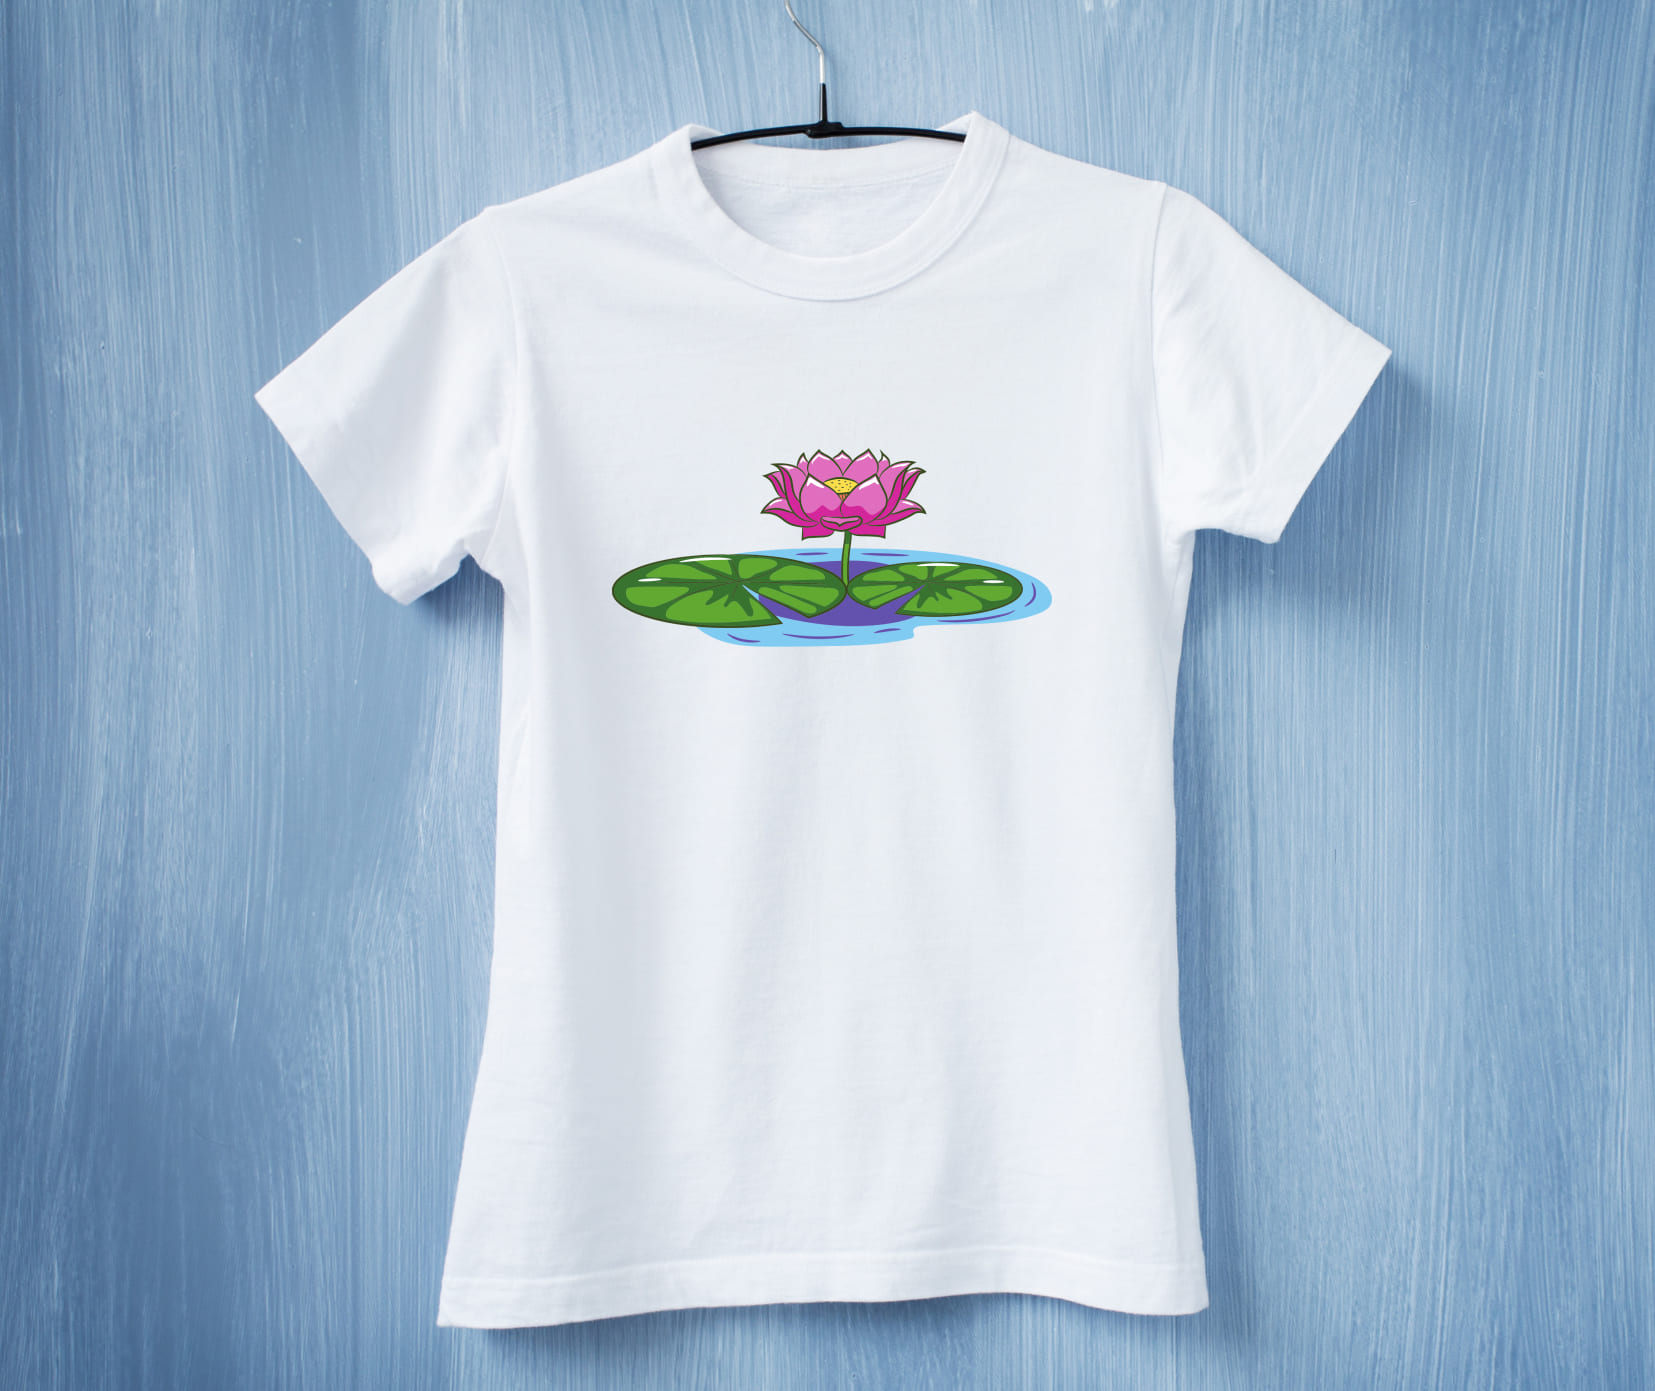 Accurate lotus on a t-shirt.